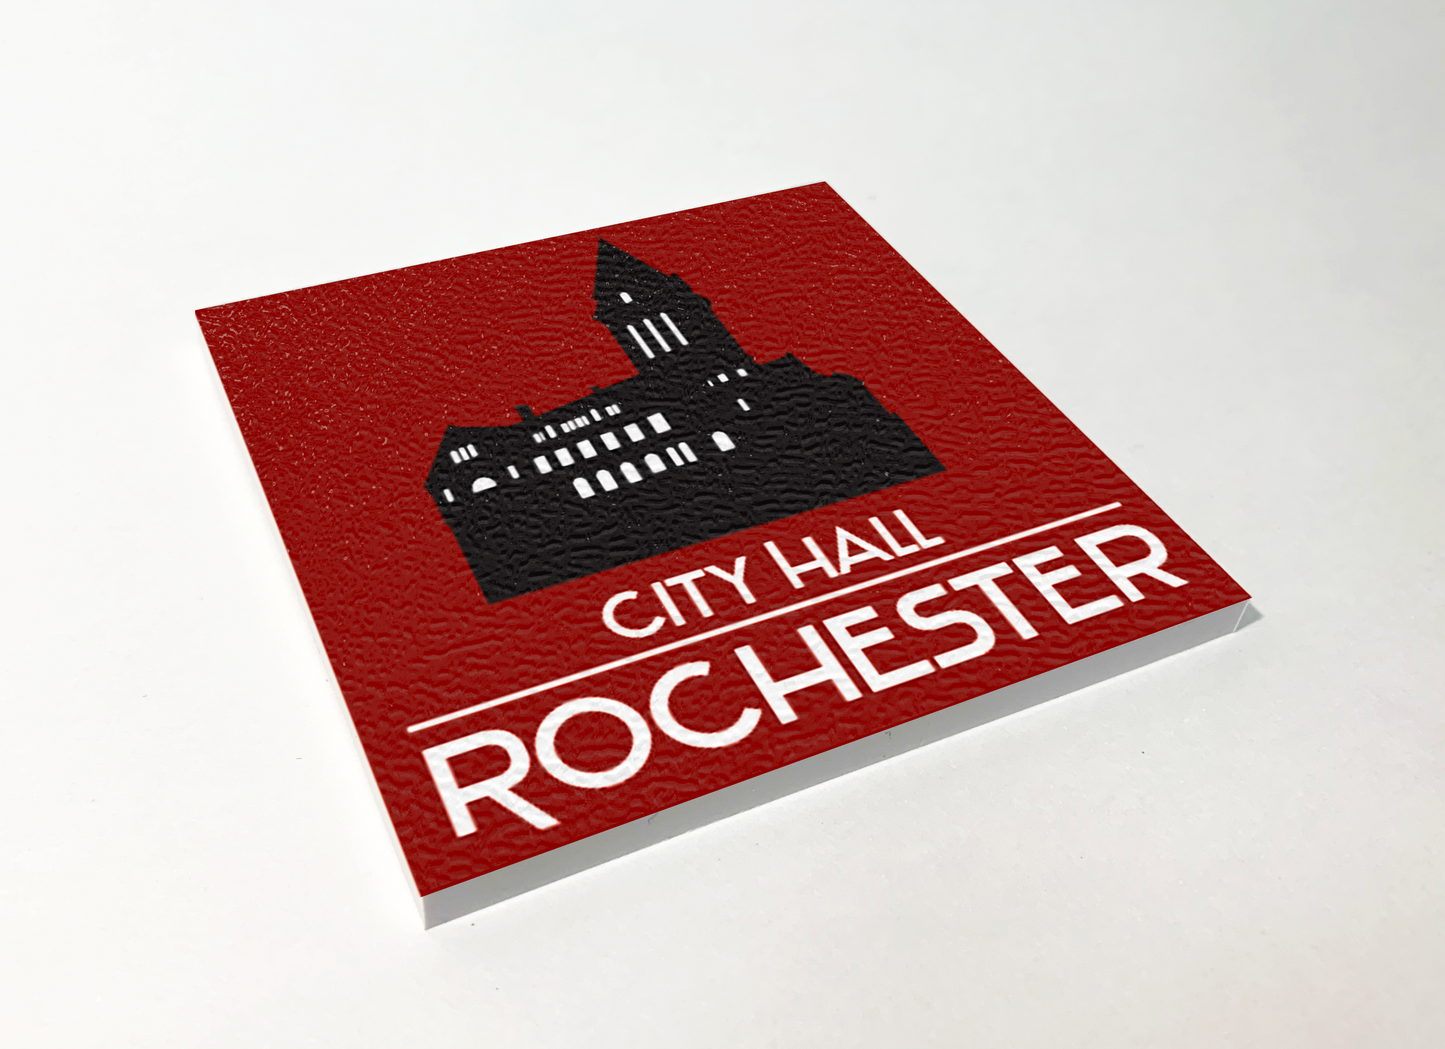 Rochester City Hall Silhouette ABS Plastic Coaster 4 Pack Designed and Handcrafted in Buffalo NY